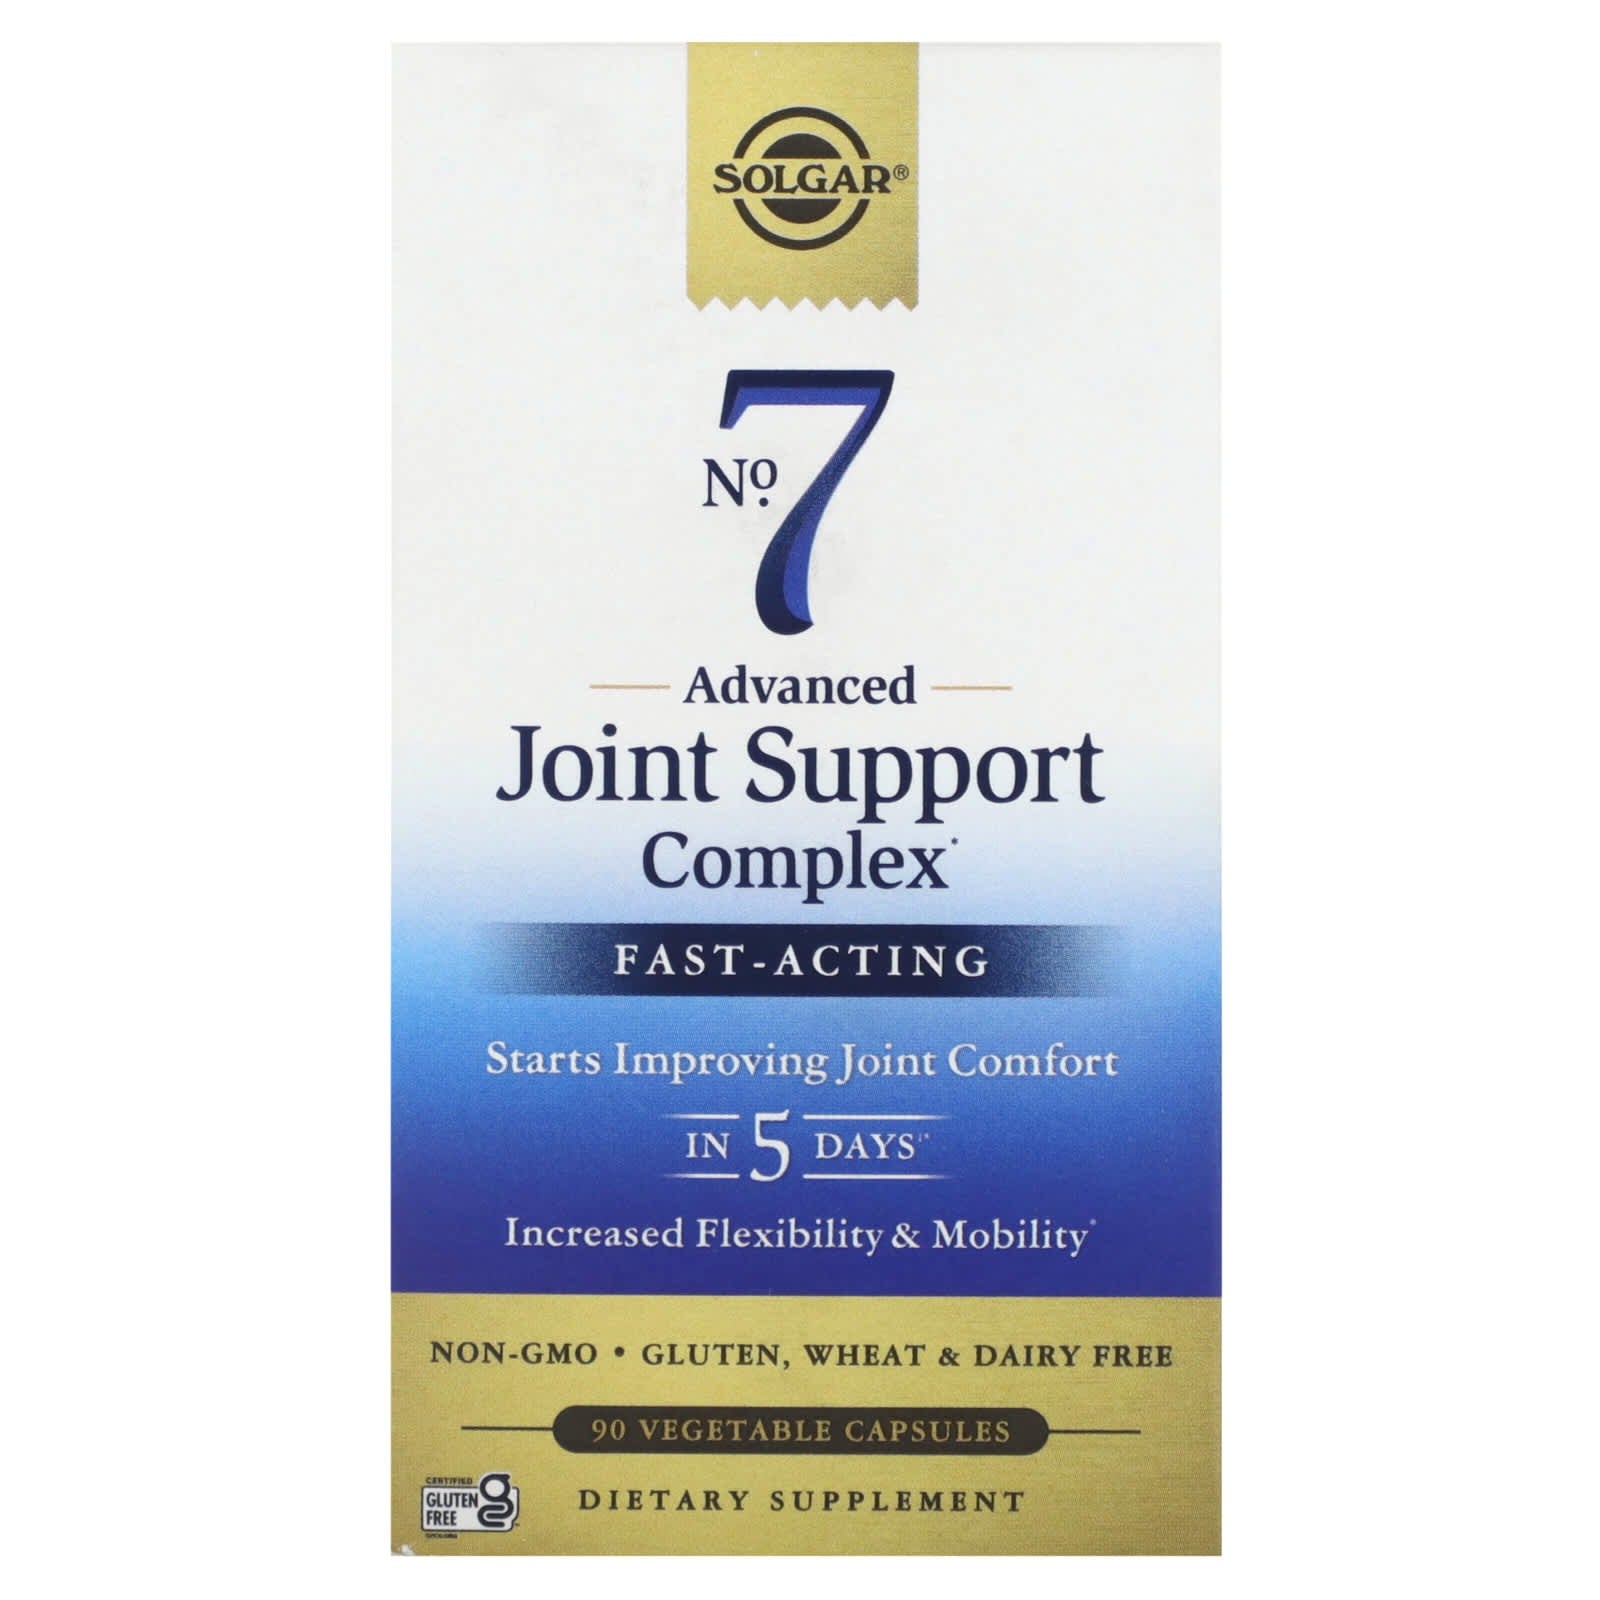 Solgar No. 7 Advanced Joint Support Complex 90 Vegetable Capsules